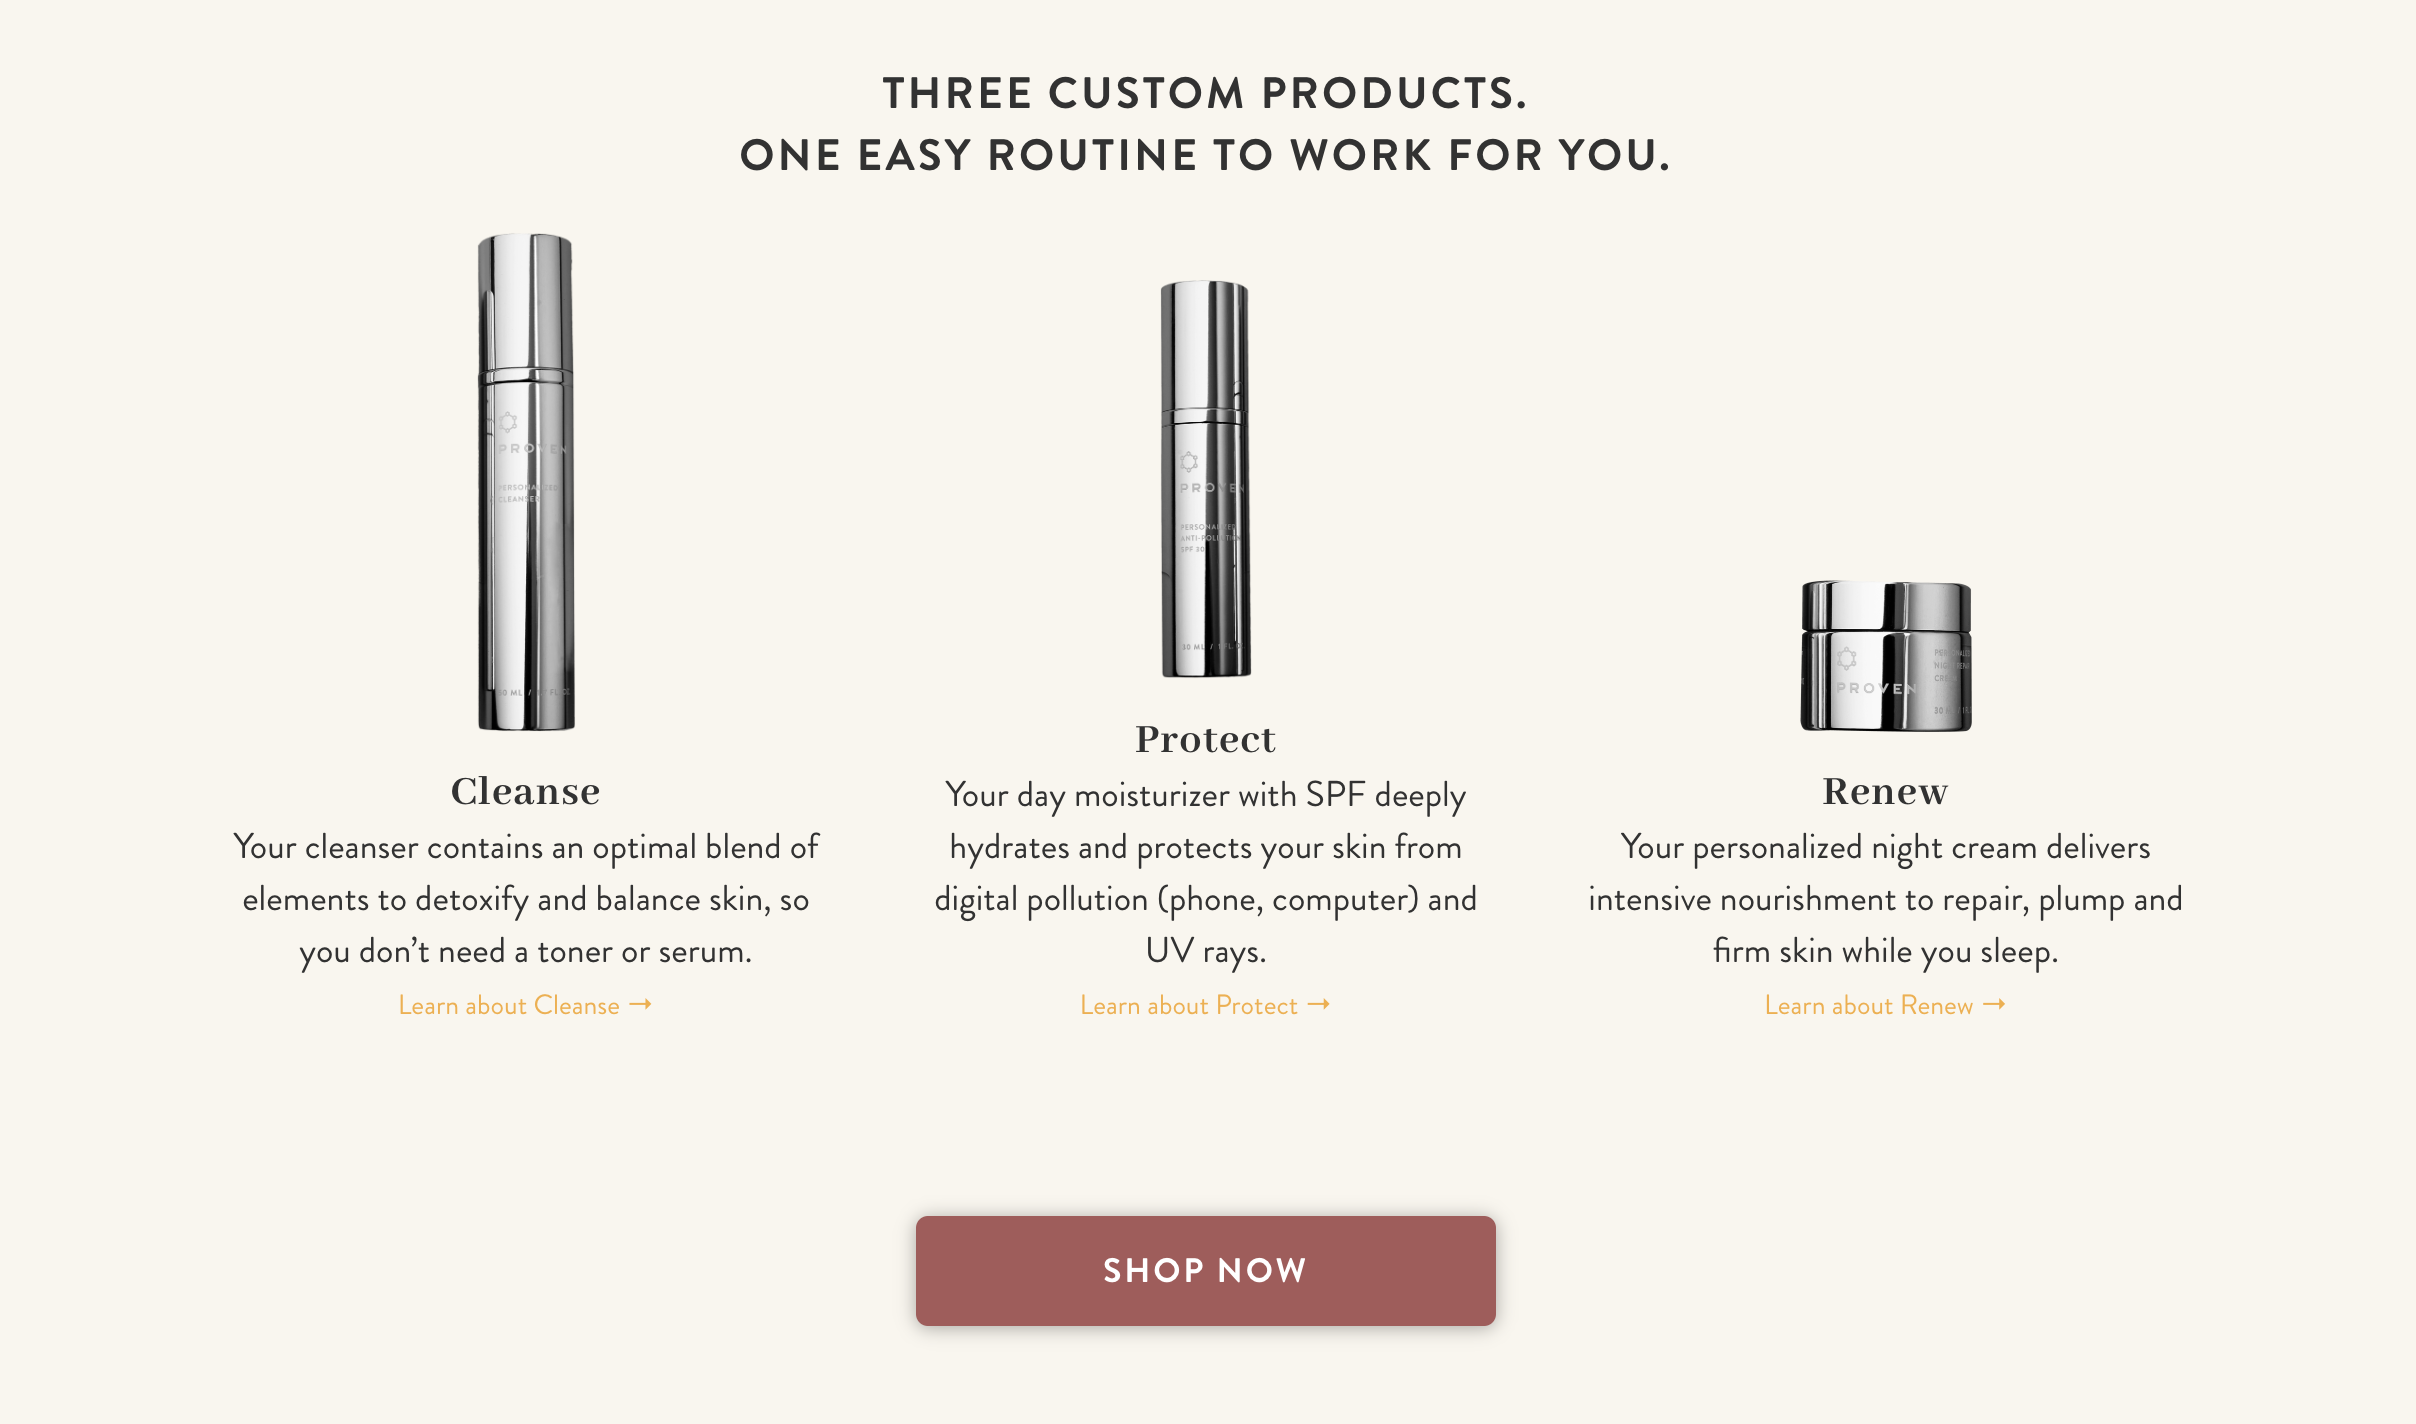 Proven Skin Care’s customizable 3-step skin care routine featured on their homepage.